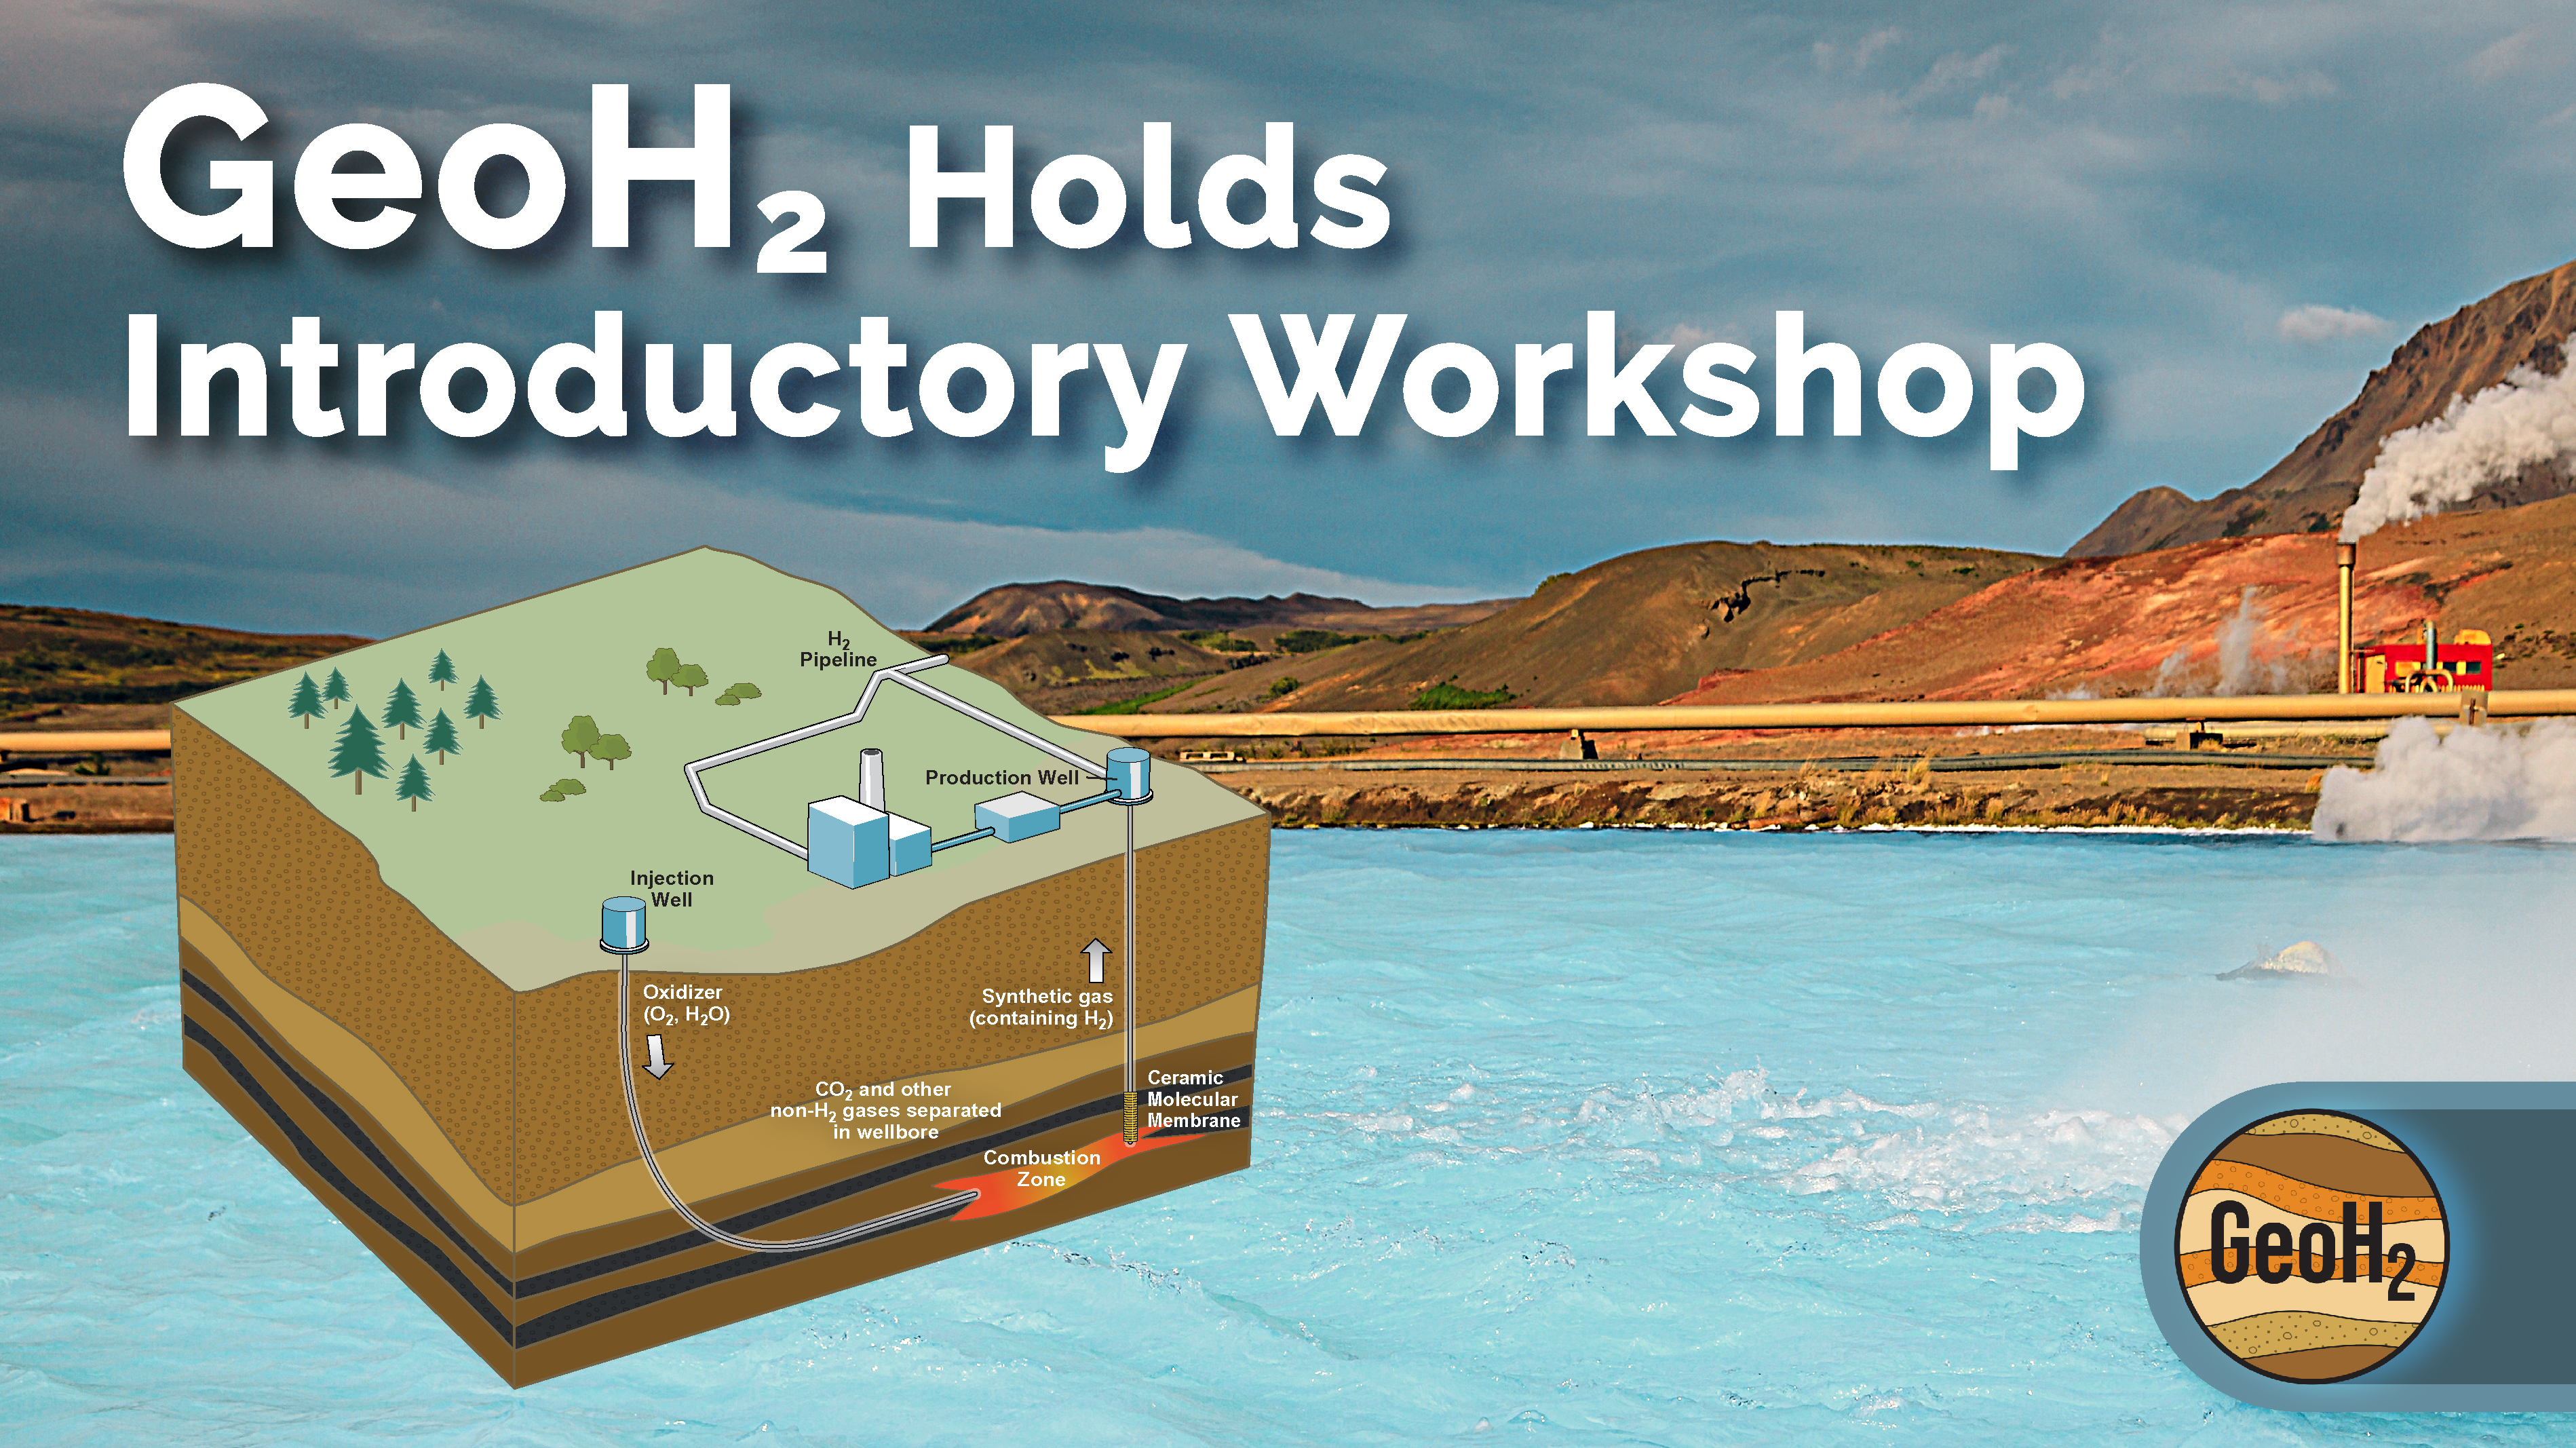 GeoH₂ Holds Introductory Workshop